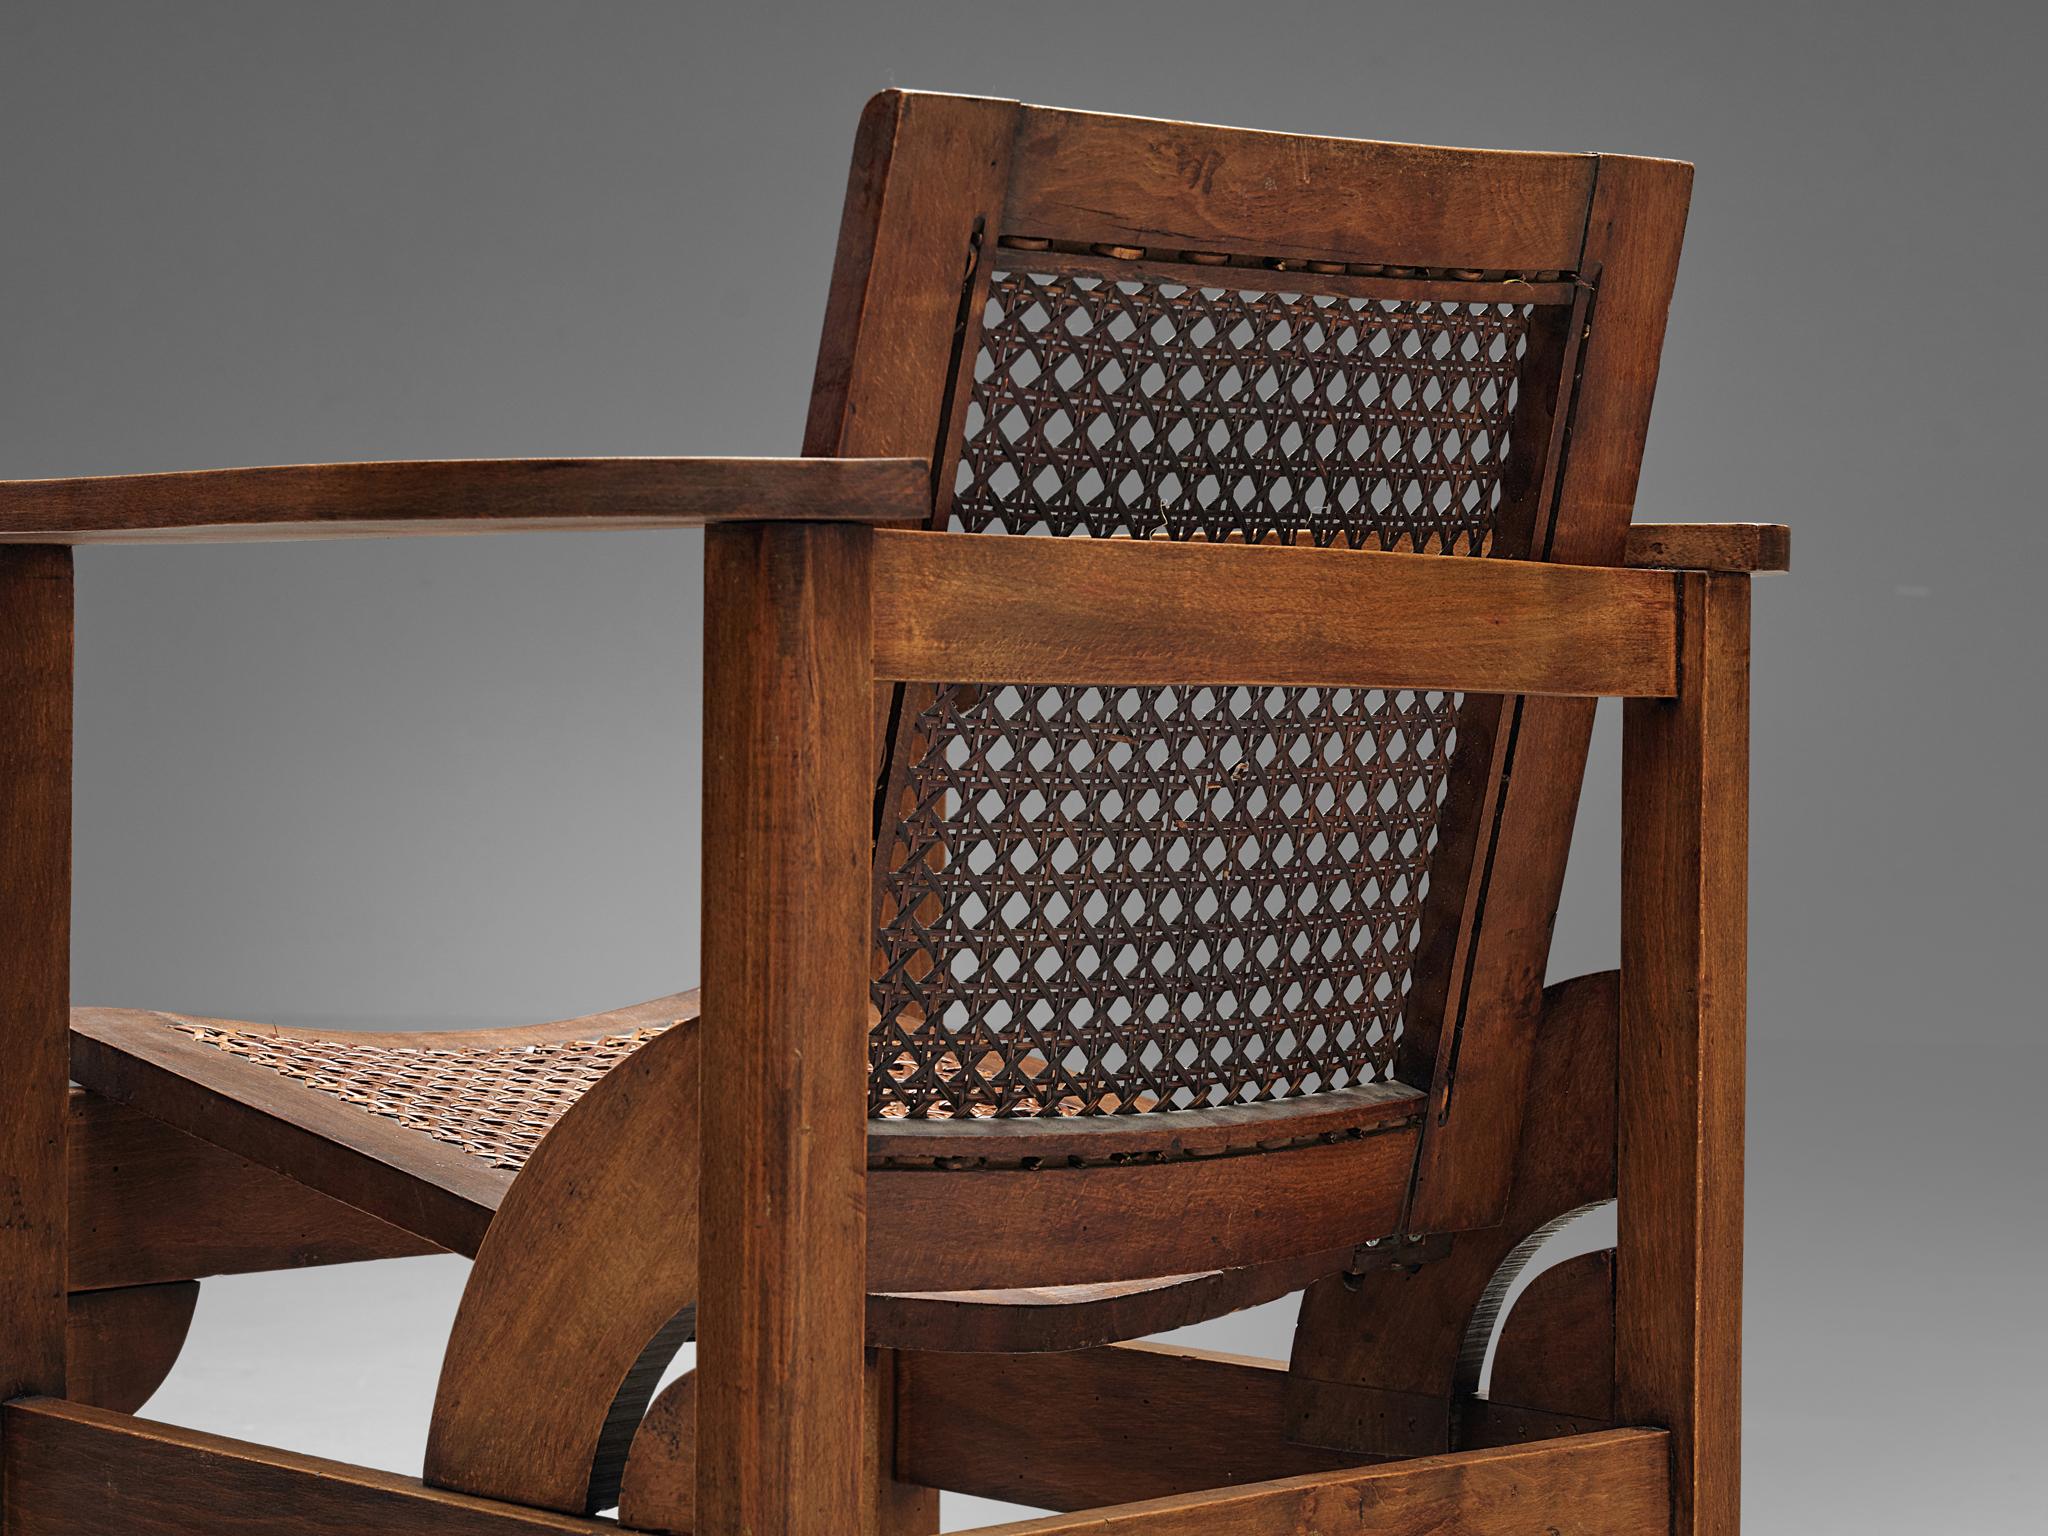 Pierre Dariel 'Hendaye' Armchair in Wood and Cane